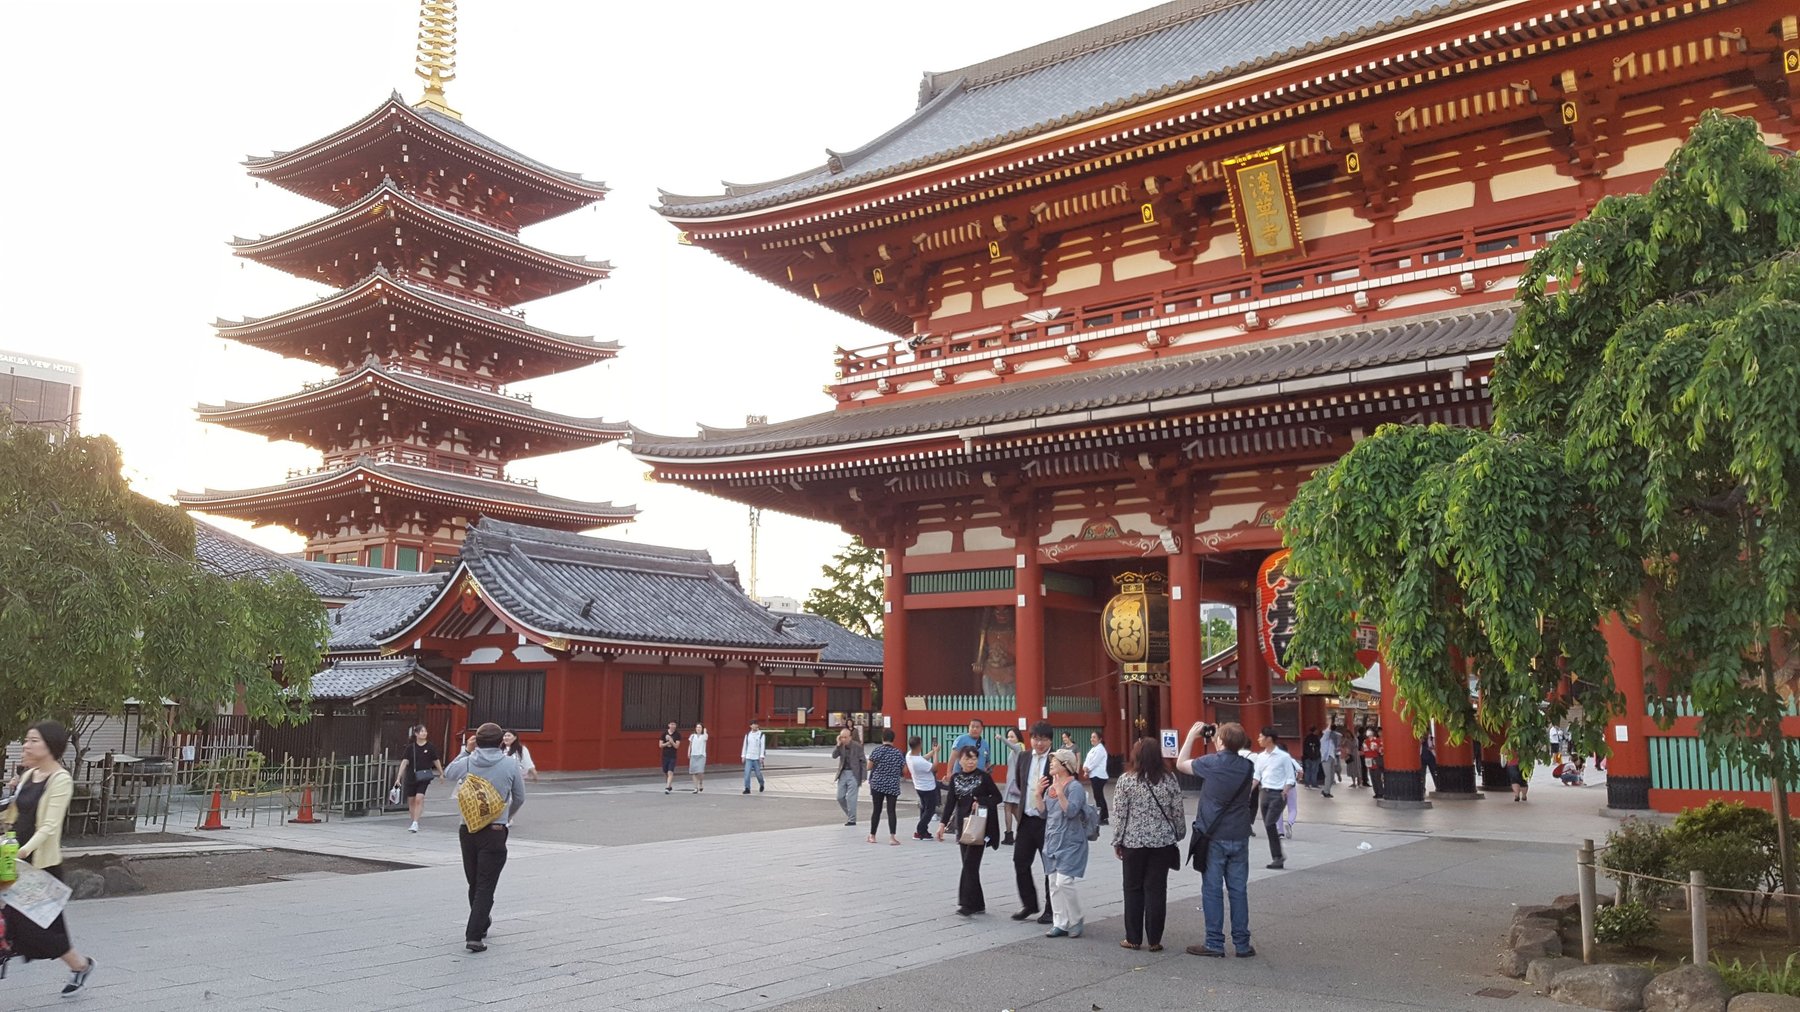 An ornate Japanese temple gate stands to the right of a five-storied tower with distinctive roofs on each floor.